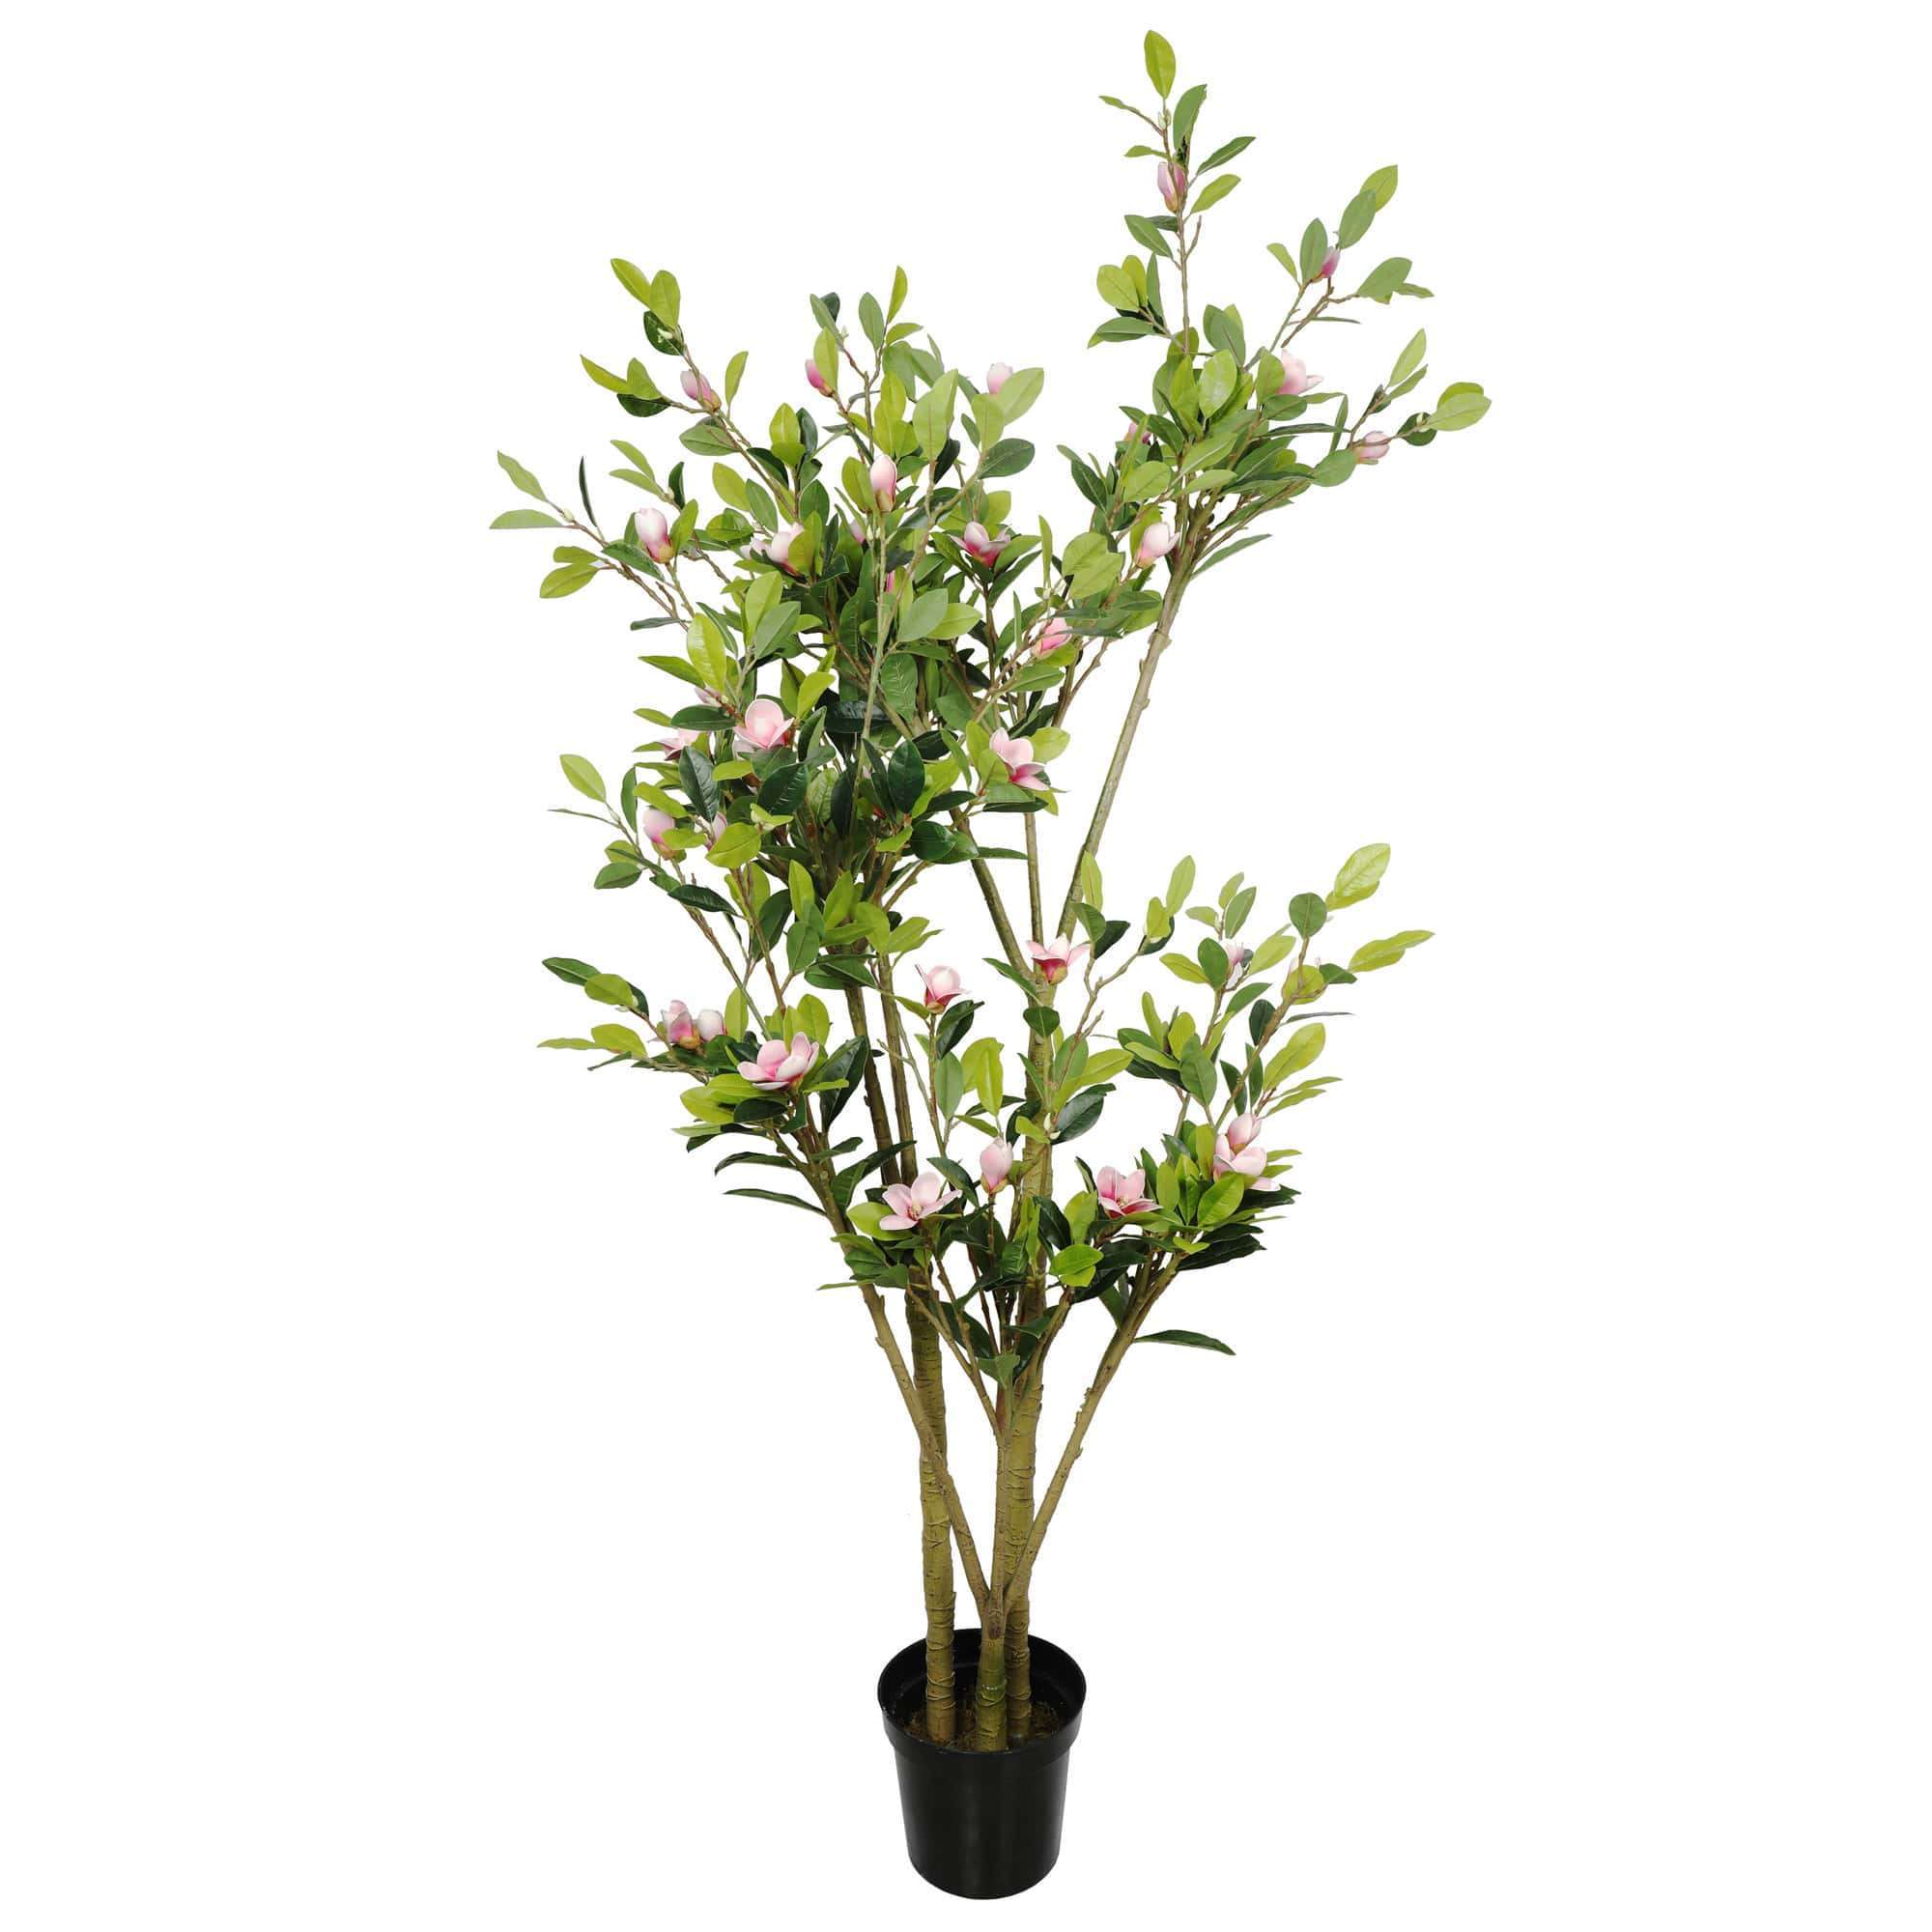 faux-potted-magnolia-tree-with-pink-flowers-250cm-265388.jpg